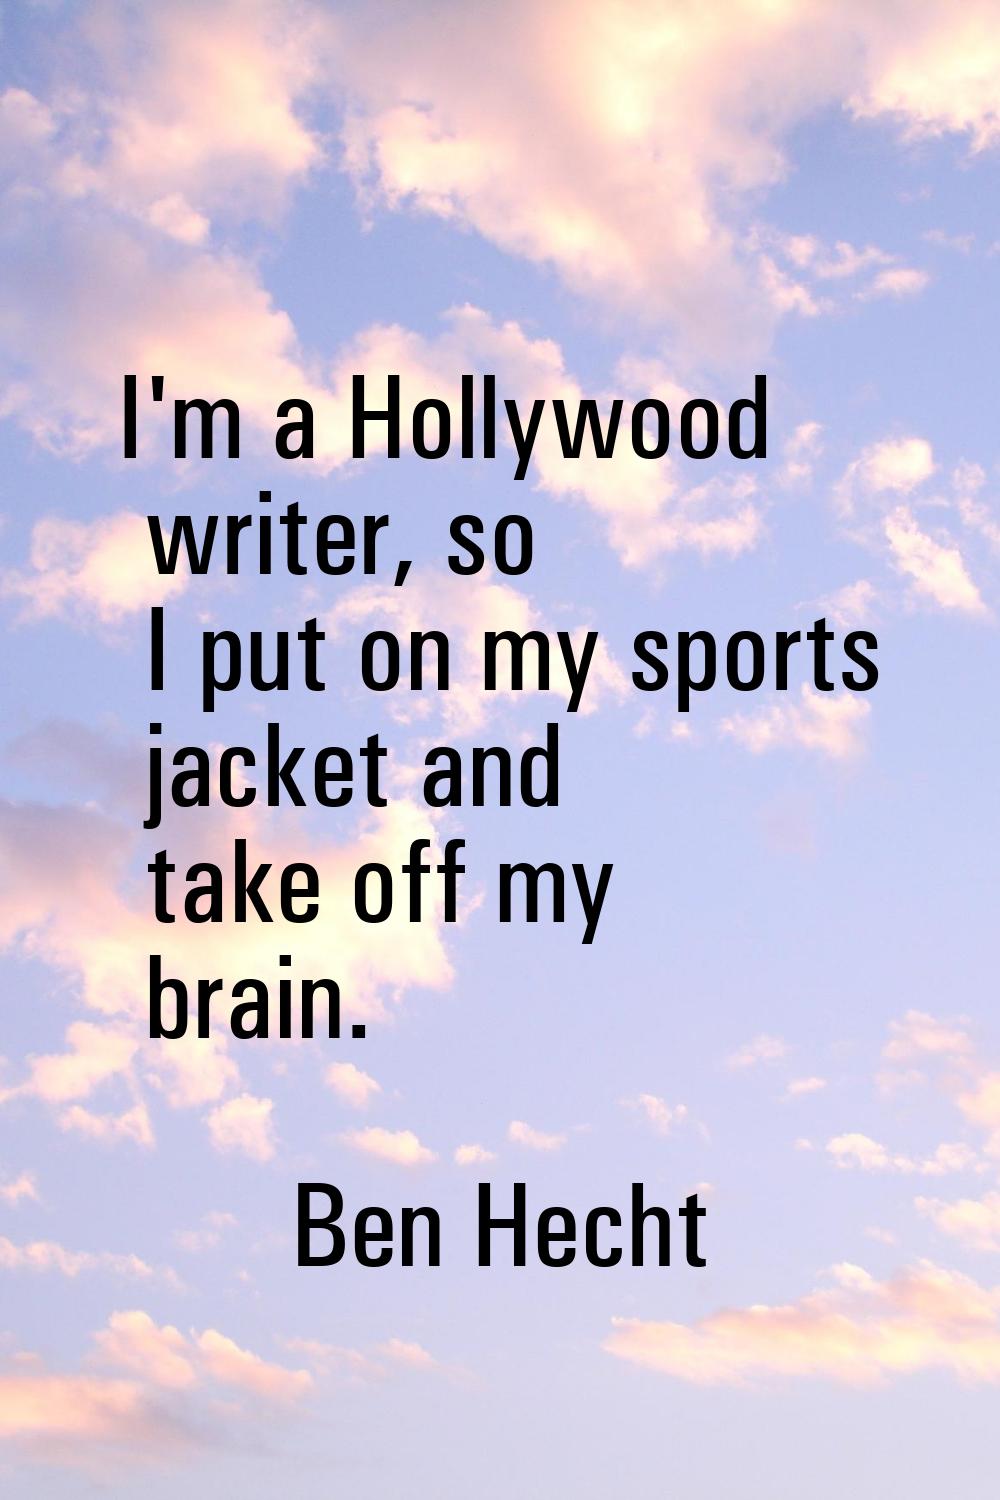 I'm a Hollywood writer, so I put on my sports jacket and take off my brain.